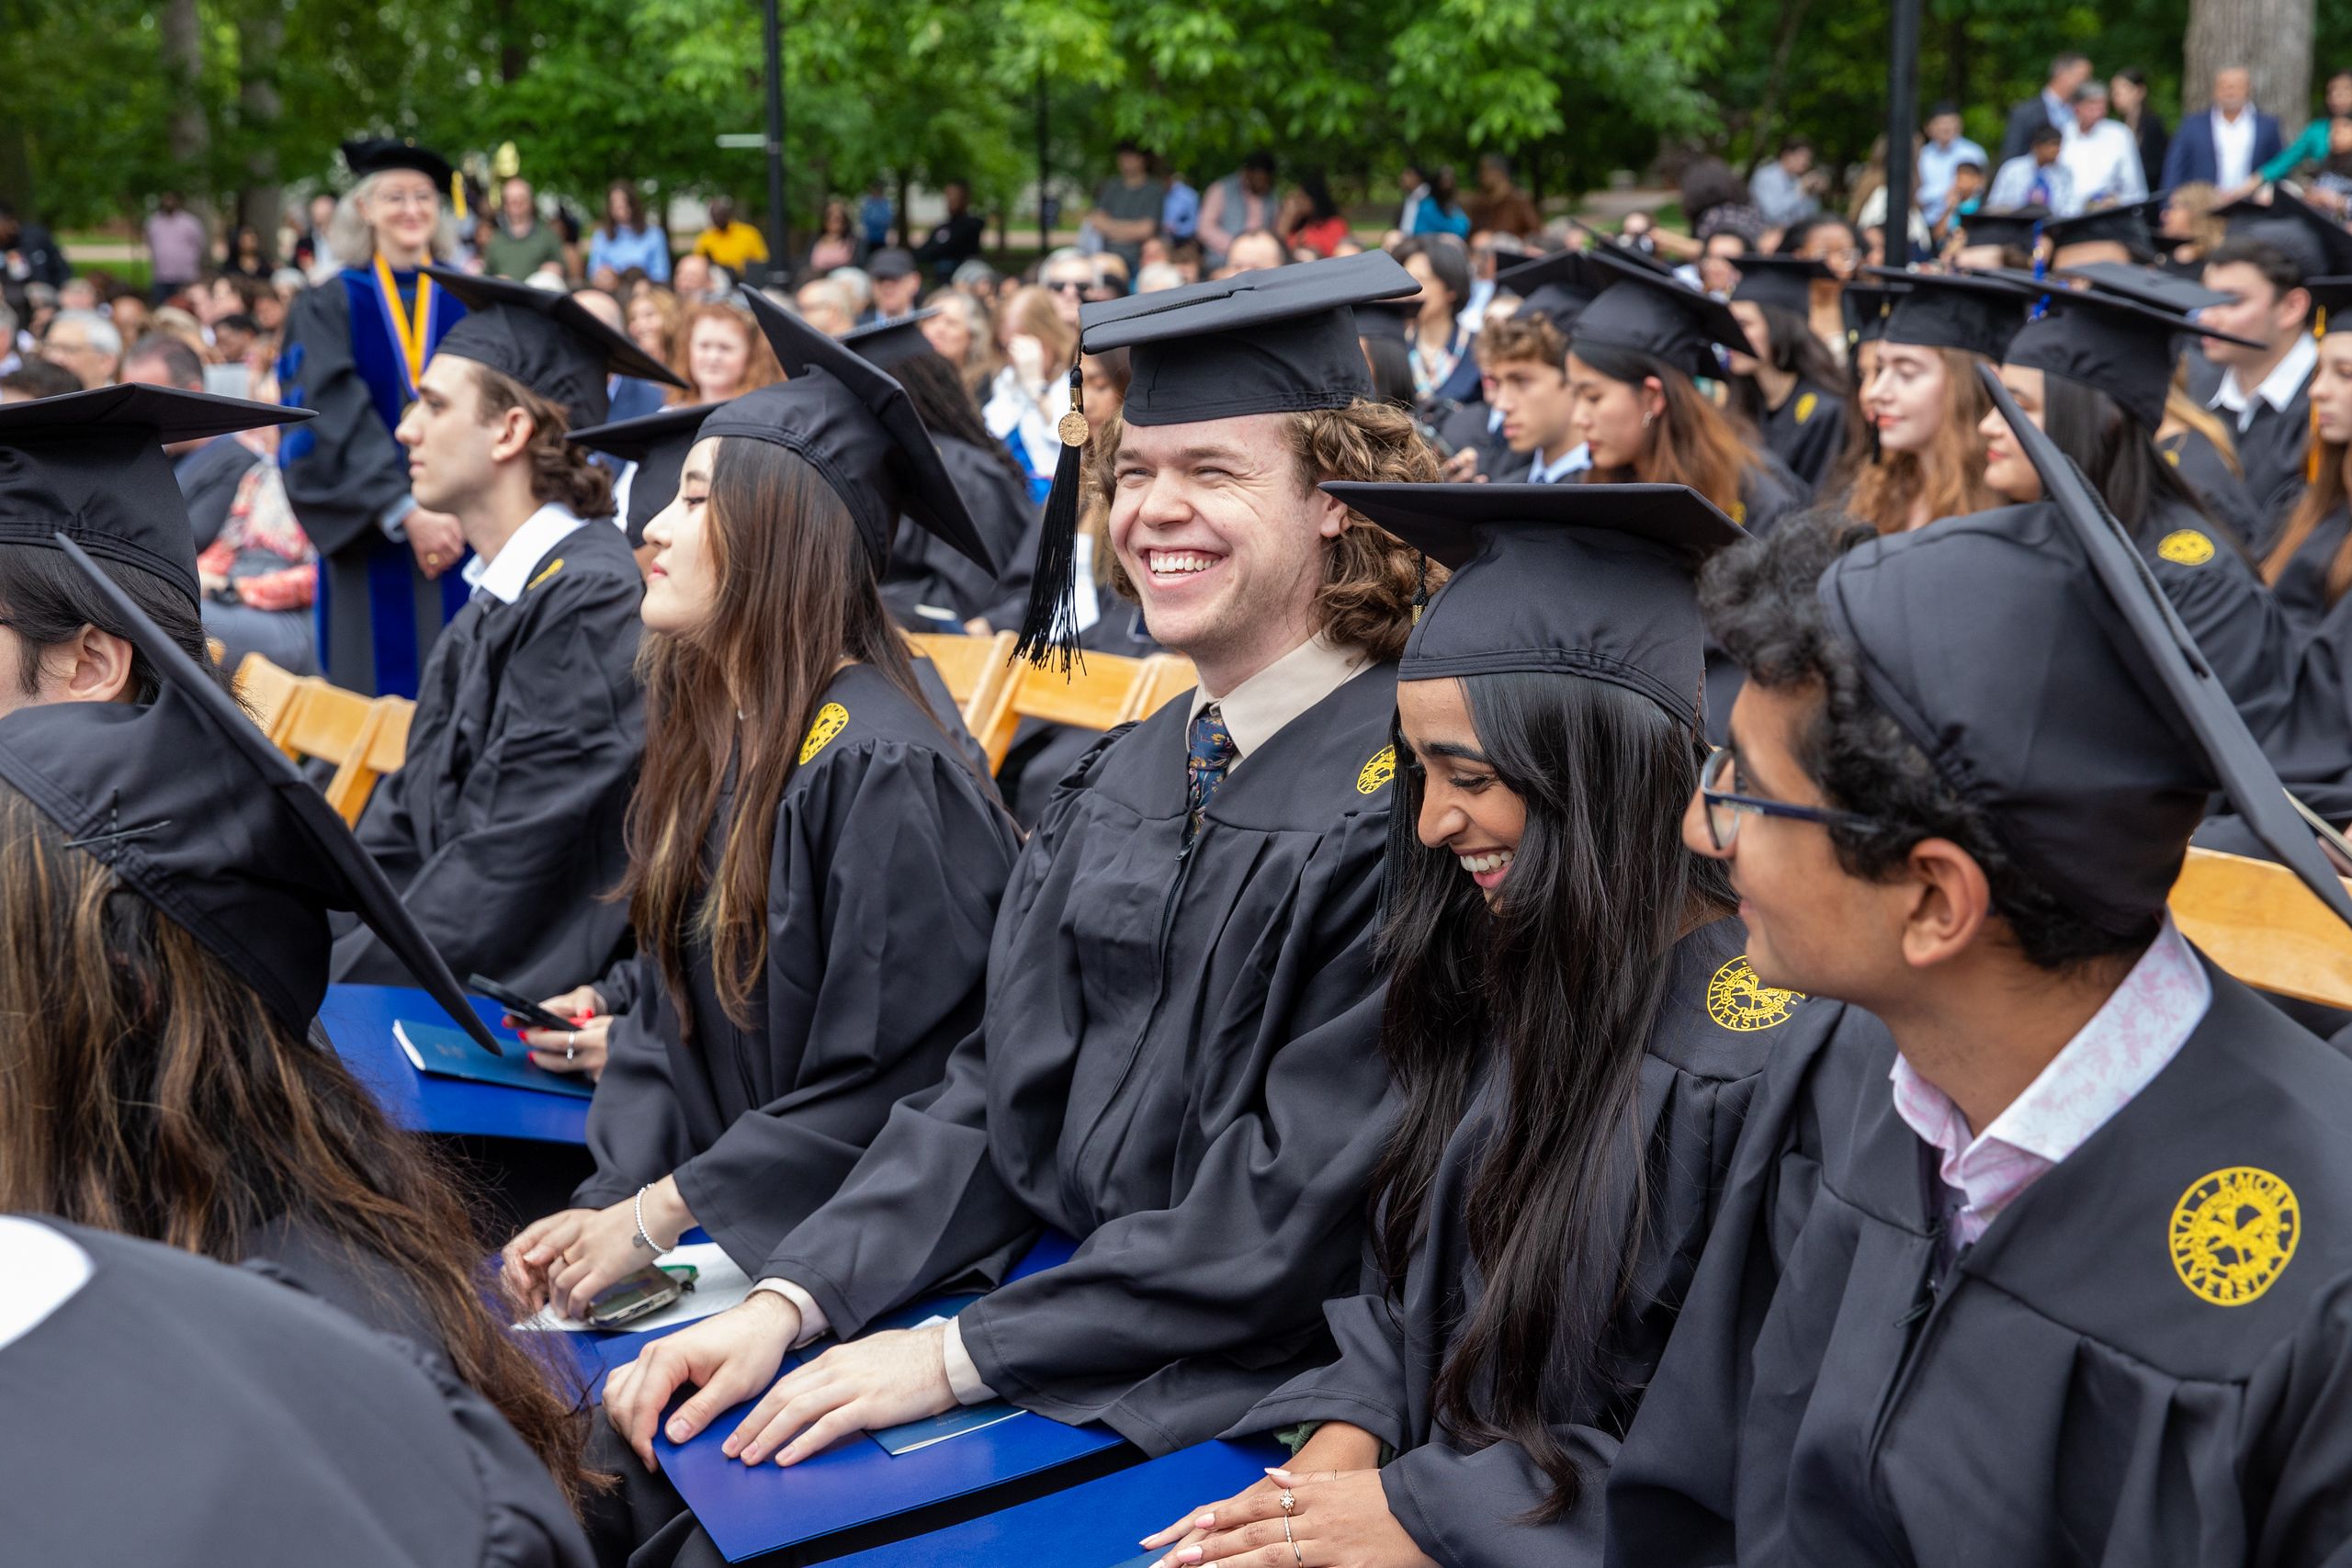 Students celebrating Commencement at Oxford College of Emory University